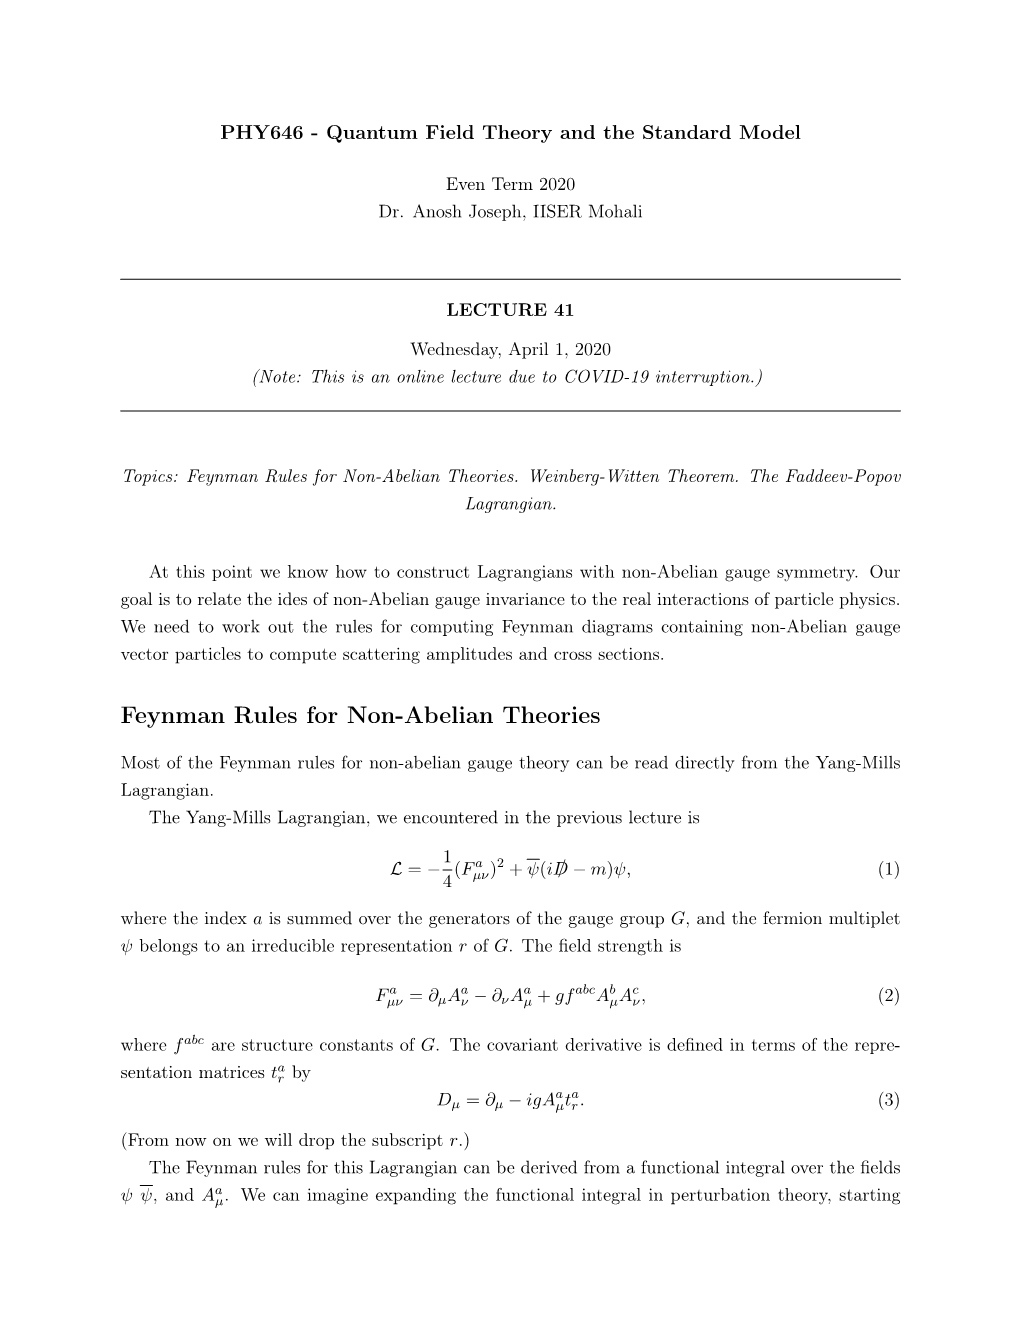 Feynman Rules for Non-Abelian Theories